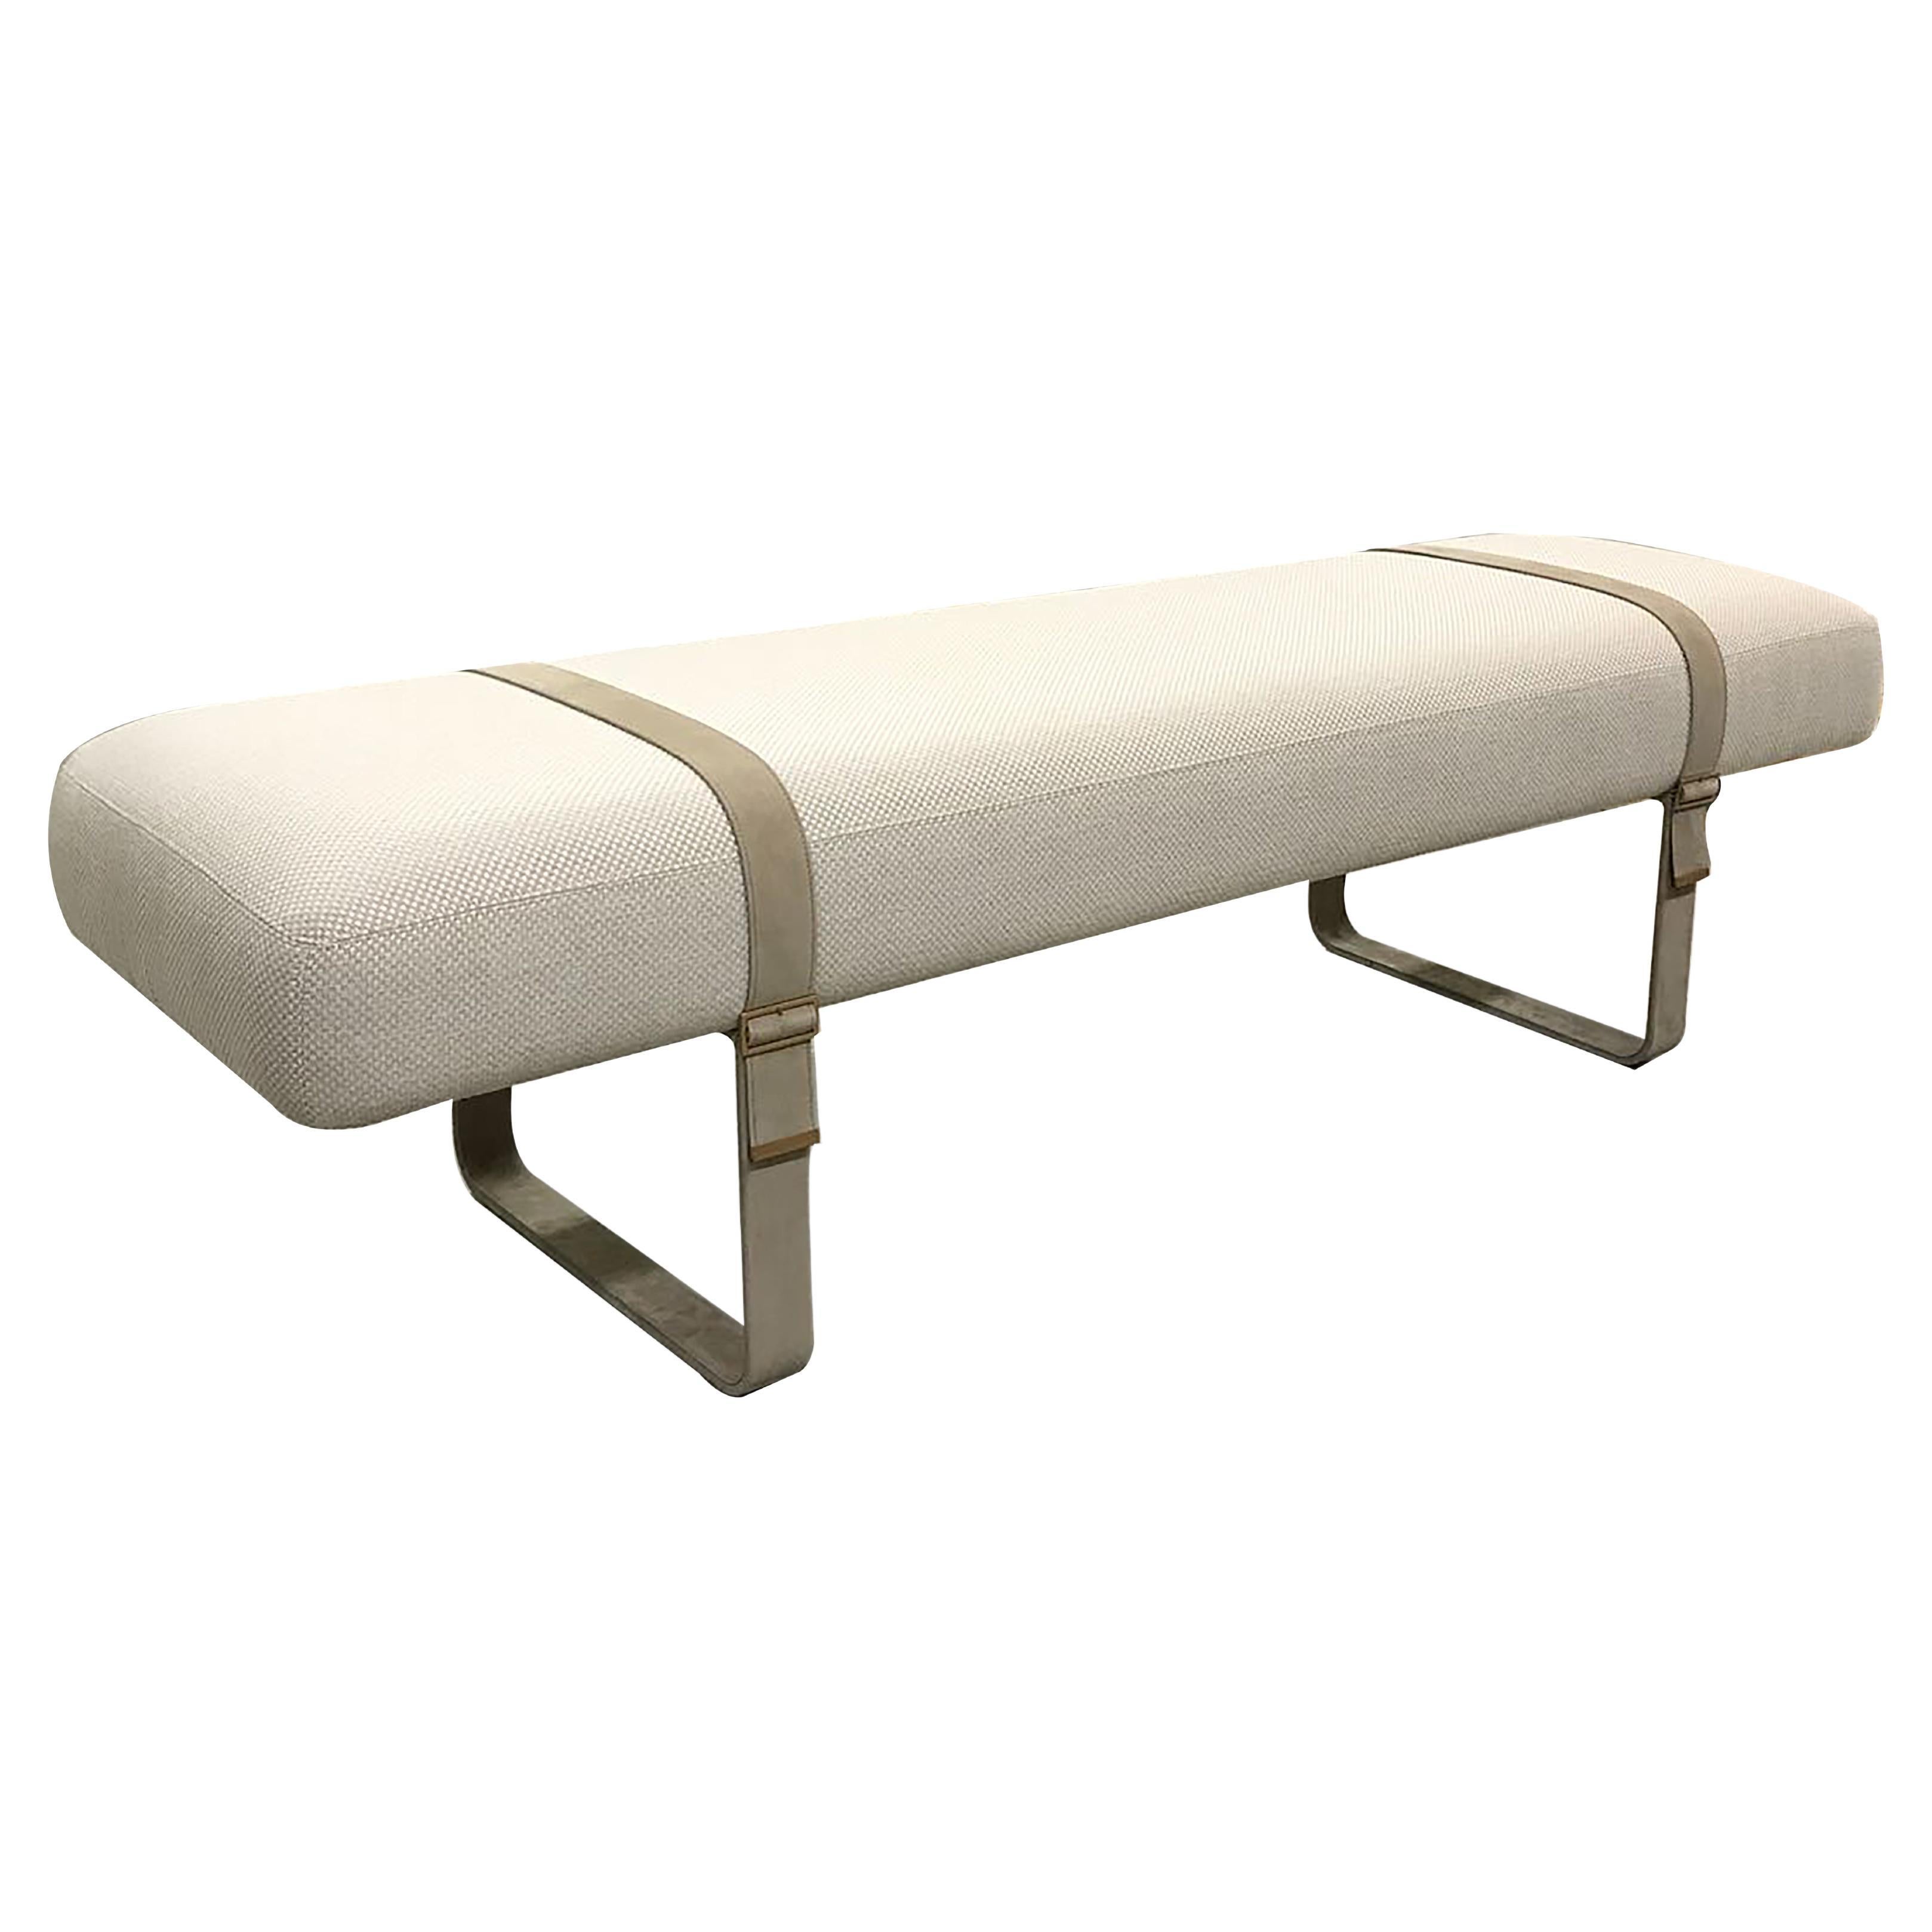 Contemporary Bench With Leather Belts Cream and Nude